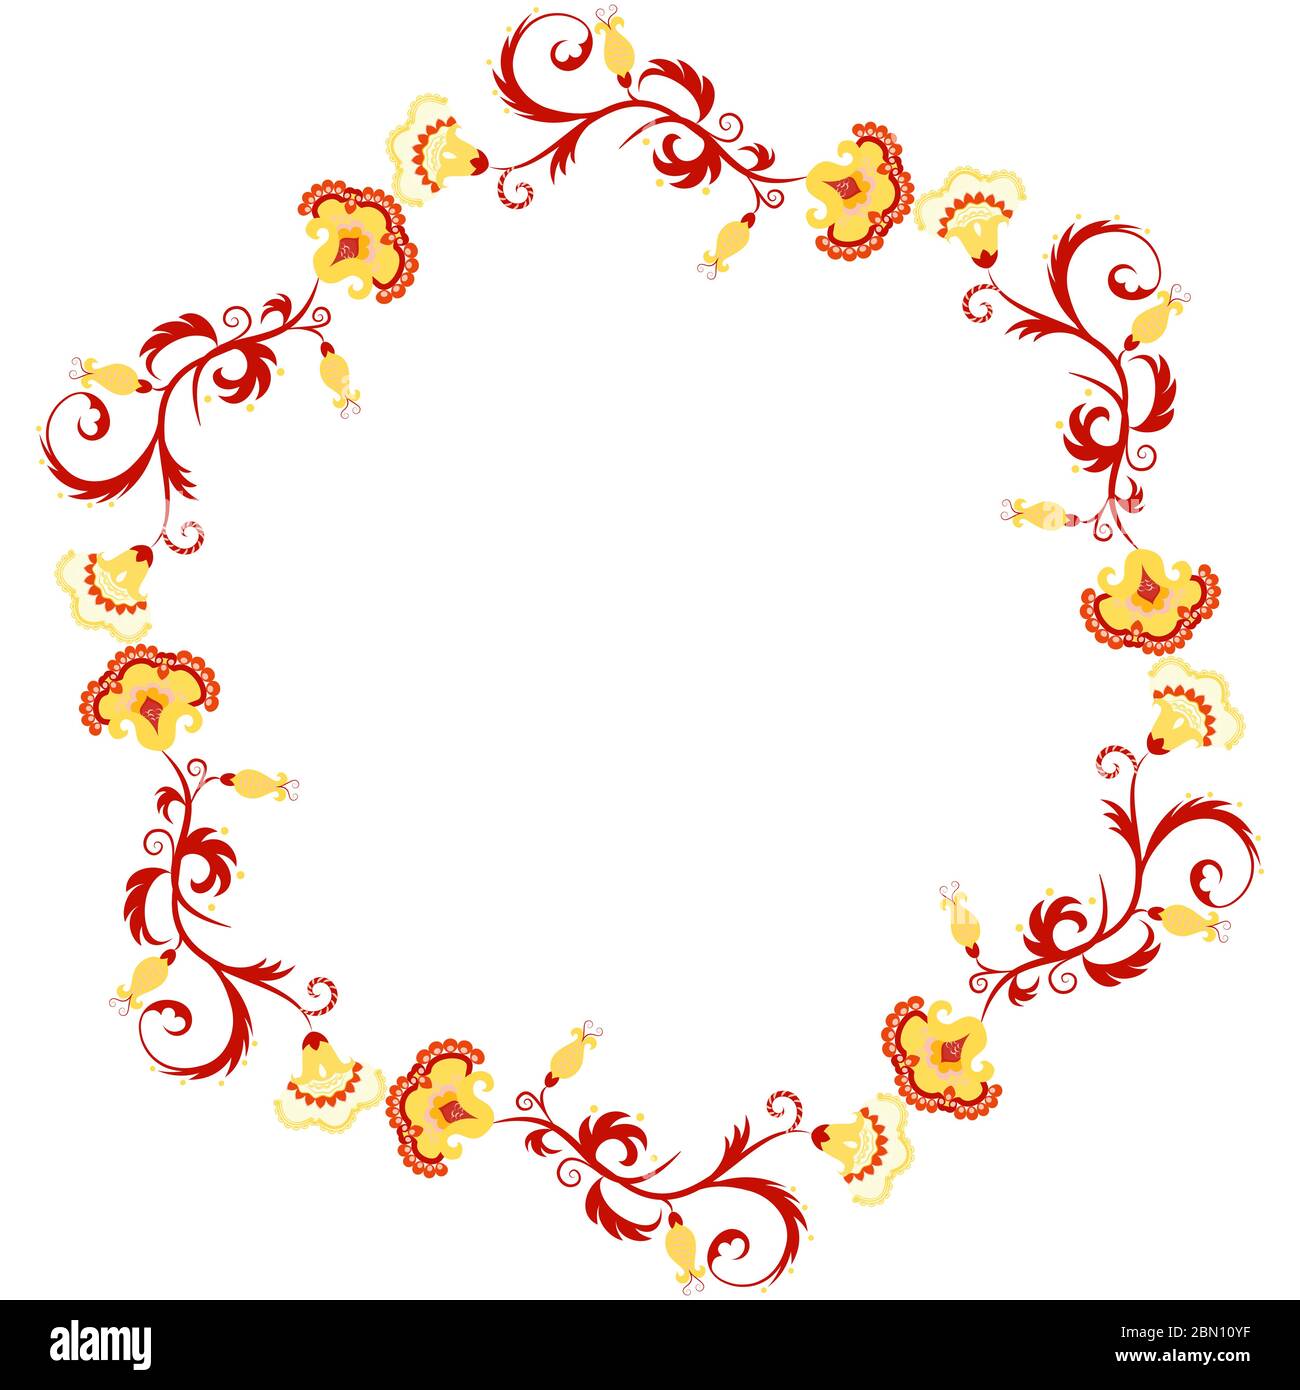 Floral frame. Indian or arabic style flowers and leaves arranged in a wreath, garland. Great for wedding invitations and birthday cards. Isolated on w Stock Vector